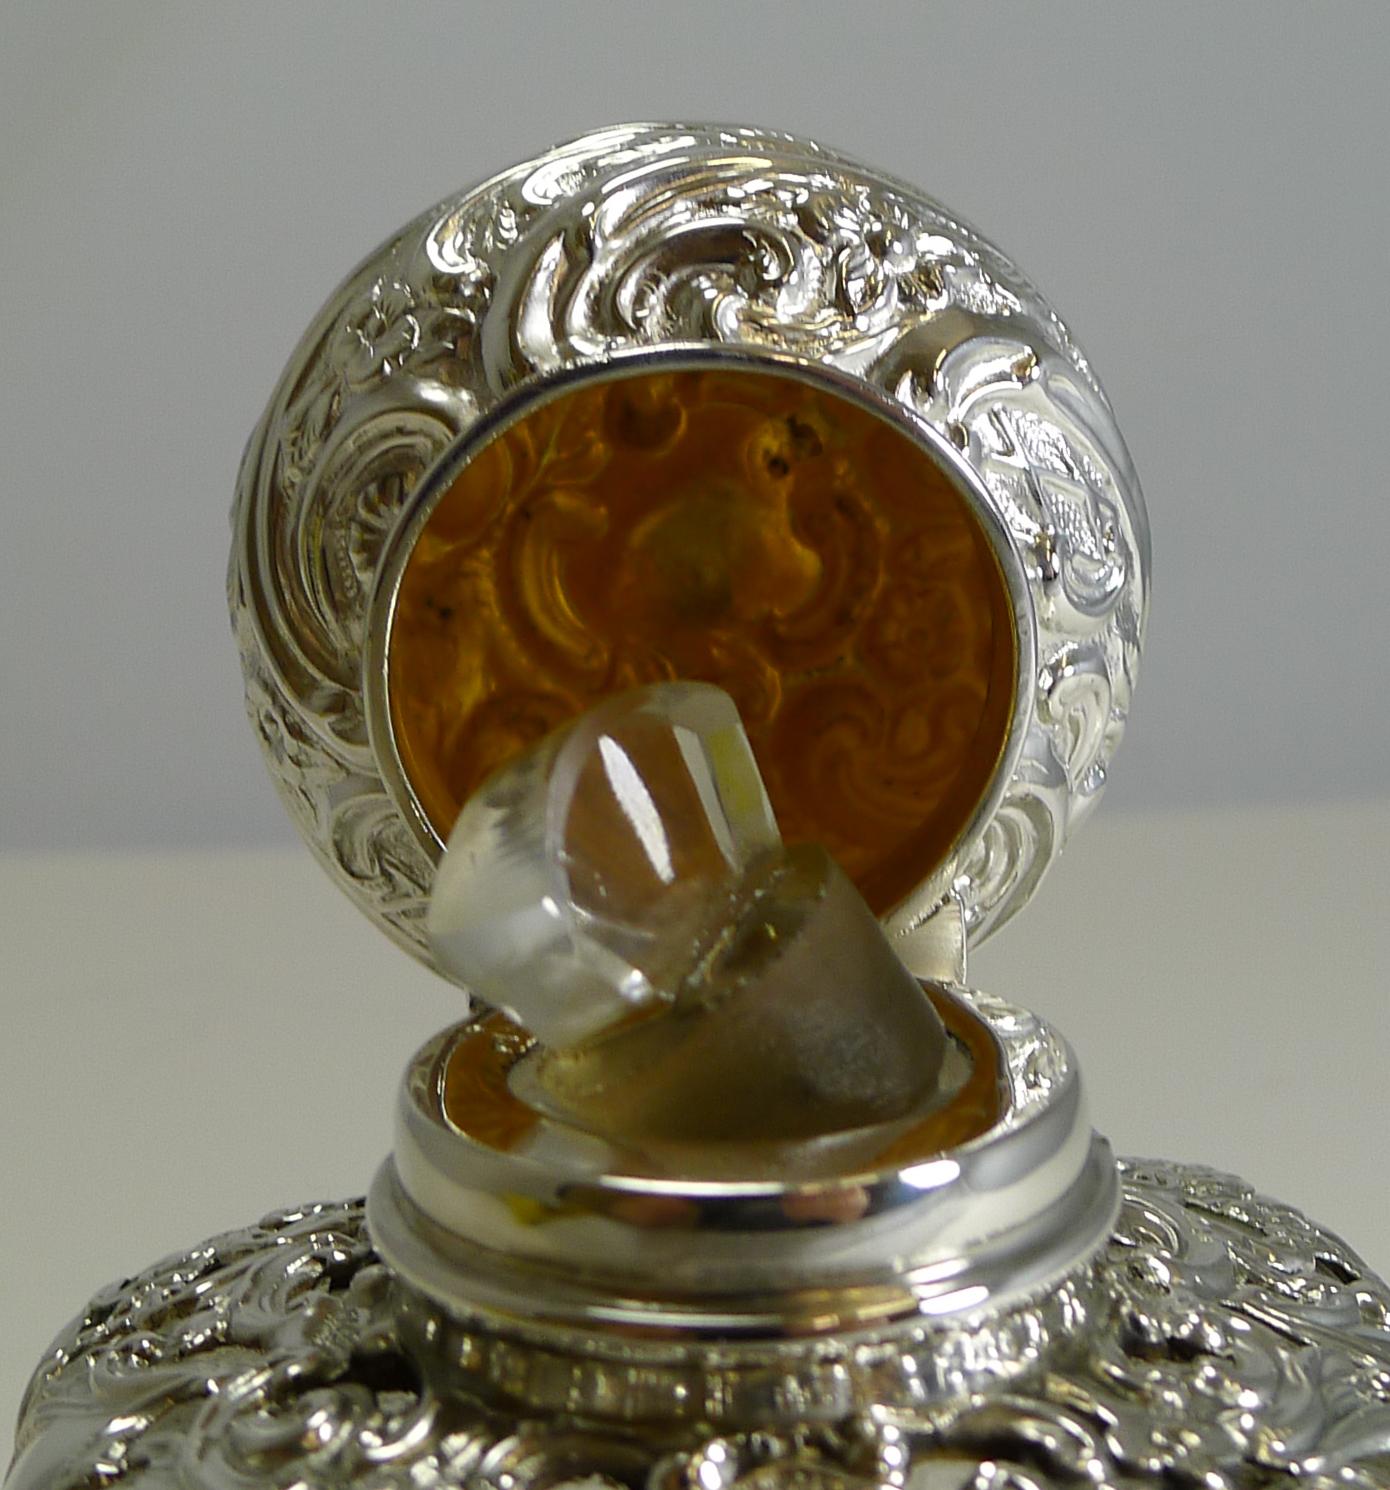 Late 19th Century Large Antique English Cut Crystal and Sterling Silver Perfume Bottle, 1898